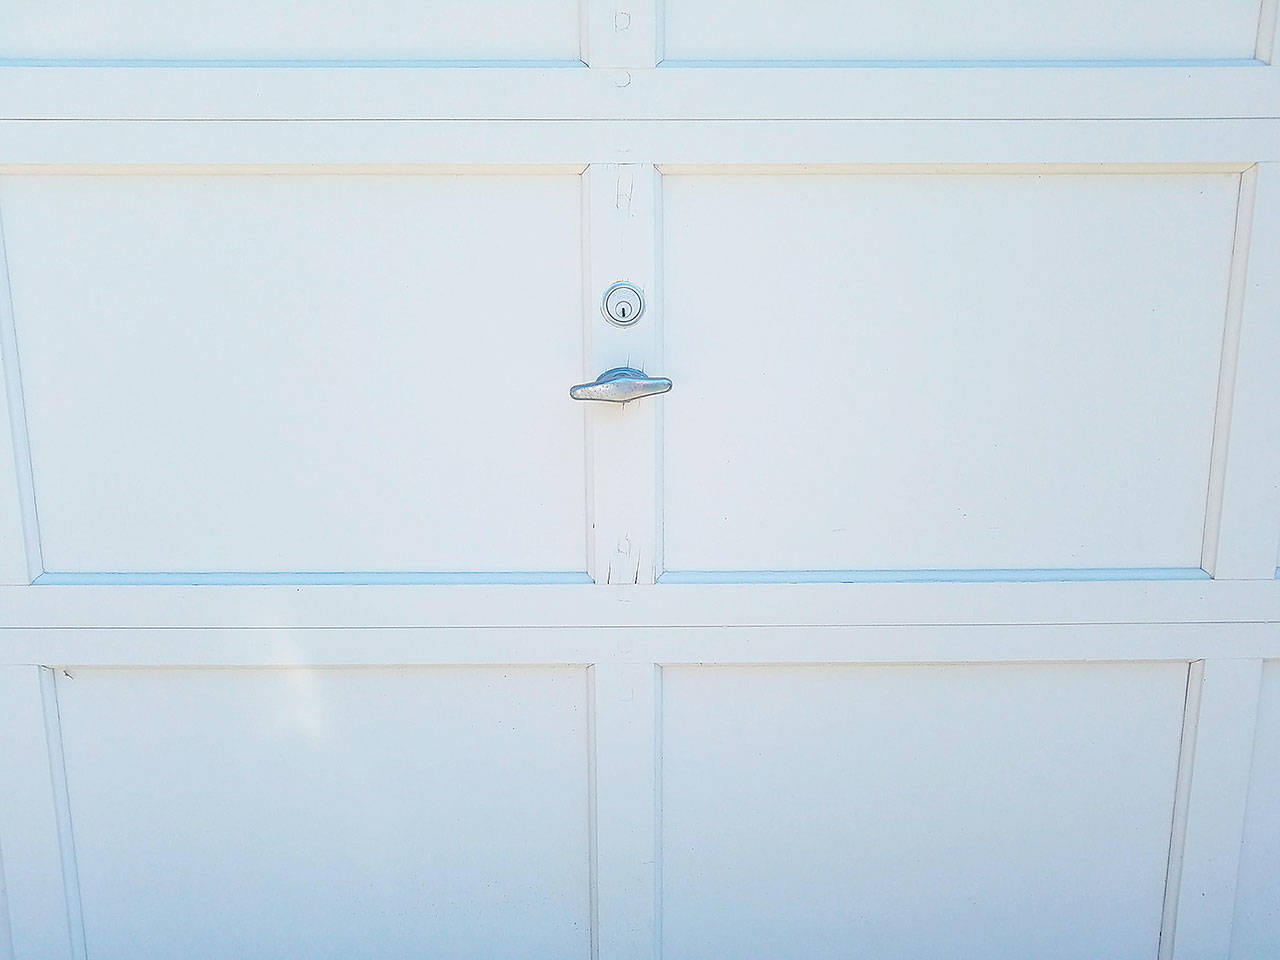 When the garage door starts opening by itself, the family has questions. (Jennifer Bardsley)